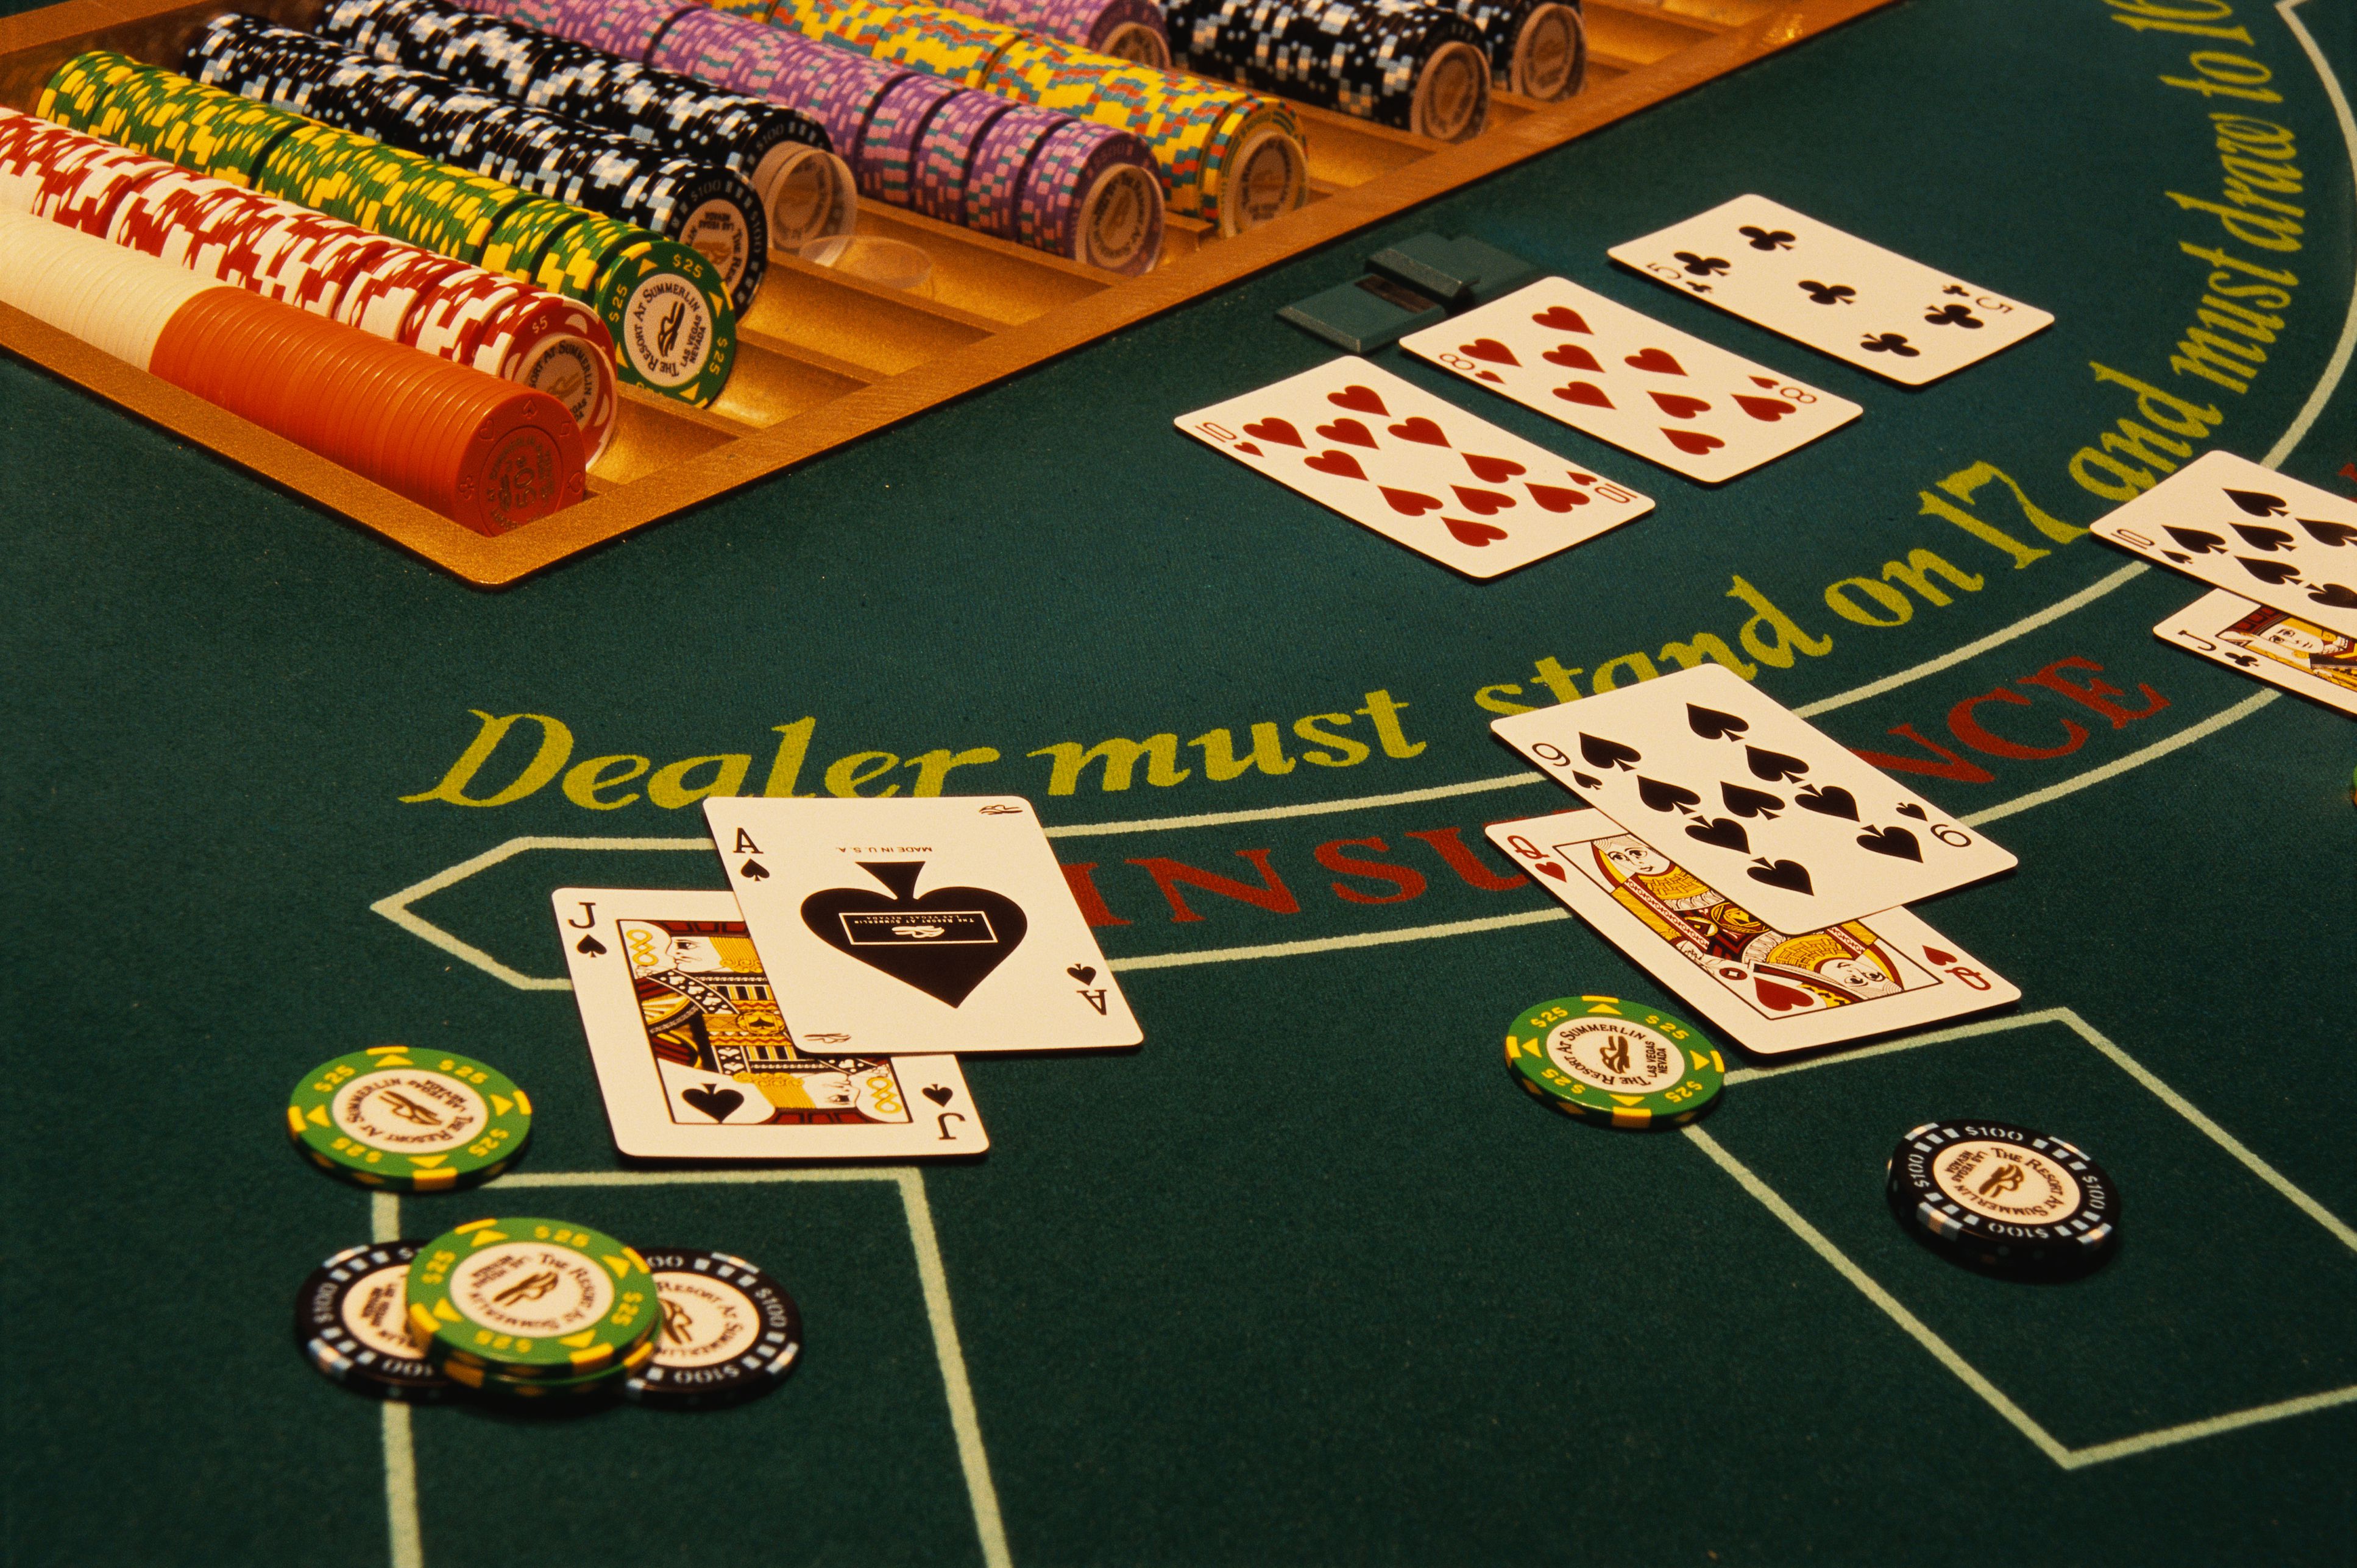 How To Play Poker At The Players Casino